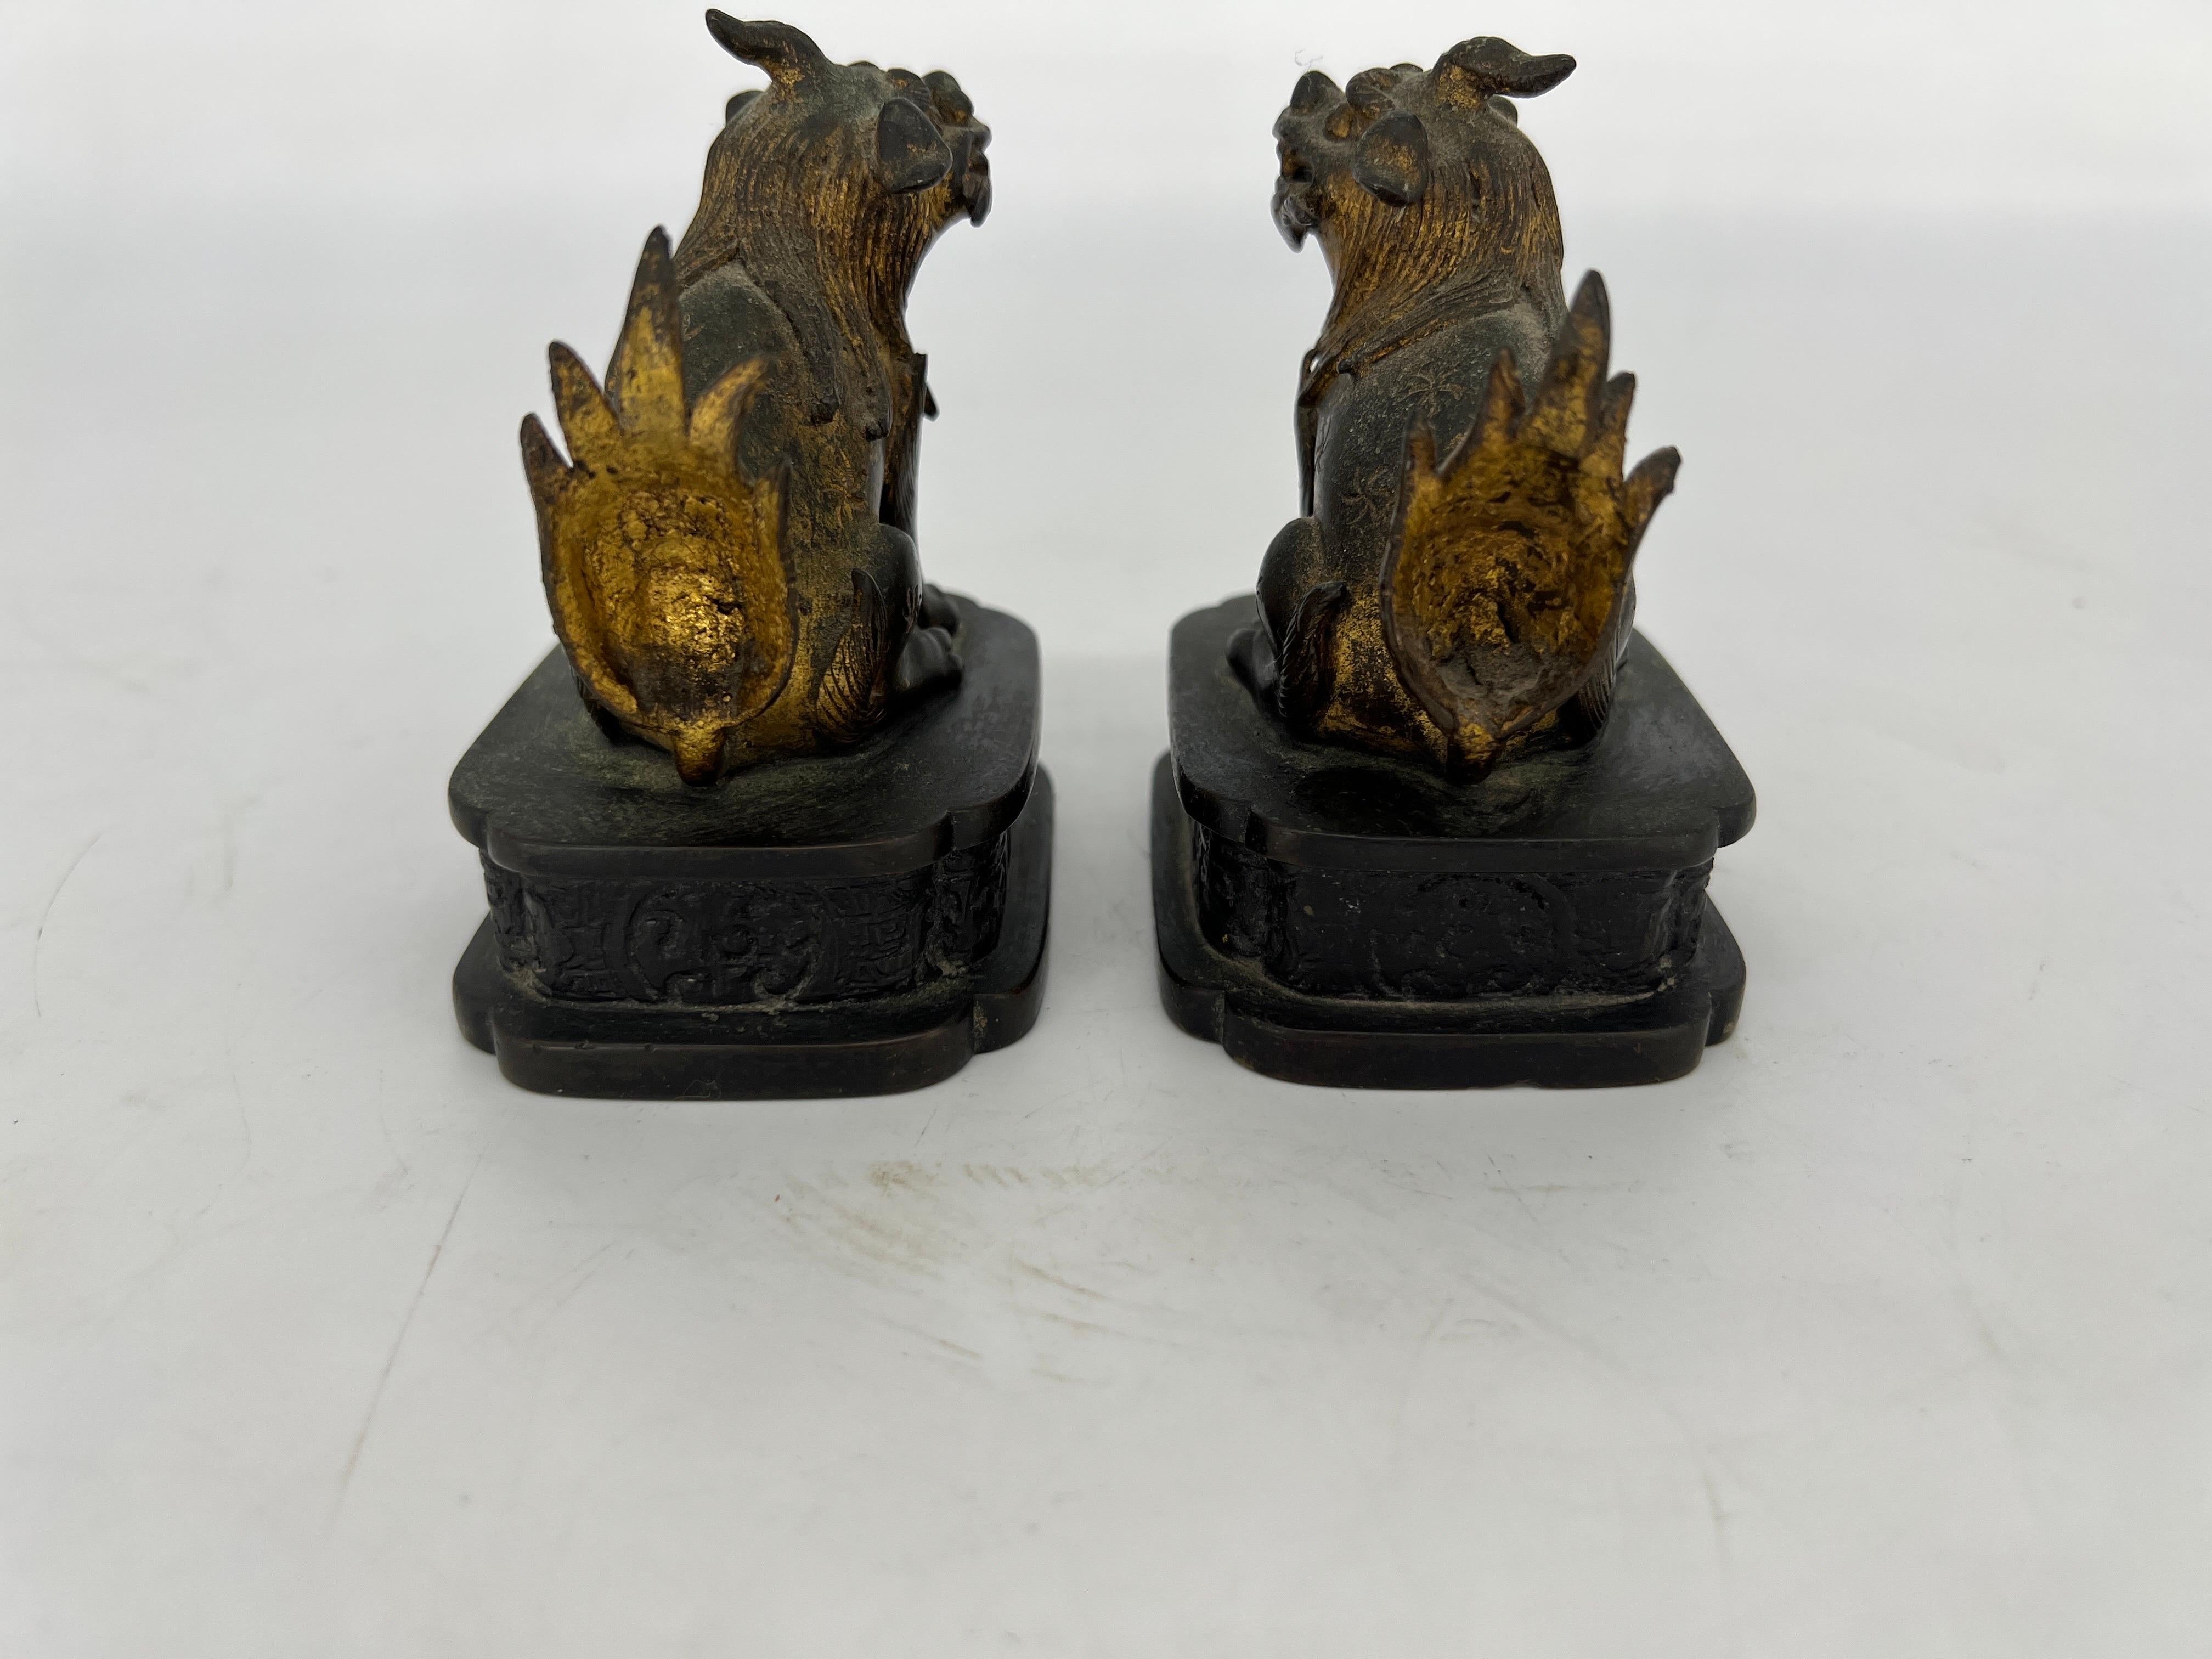 Chinese Export Pair, Ming Dynasty Gilt Bronze Diminutive Chinese Foo Dogs / Guardian Lions For Sale